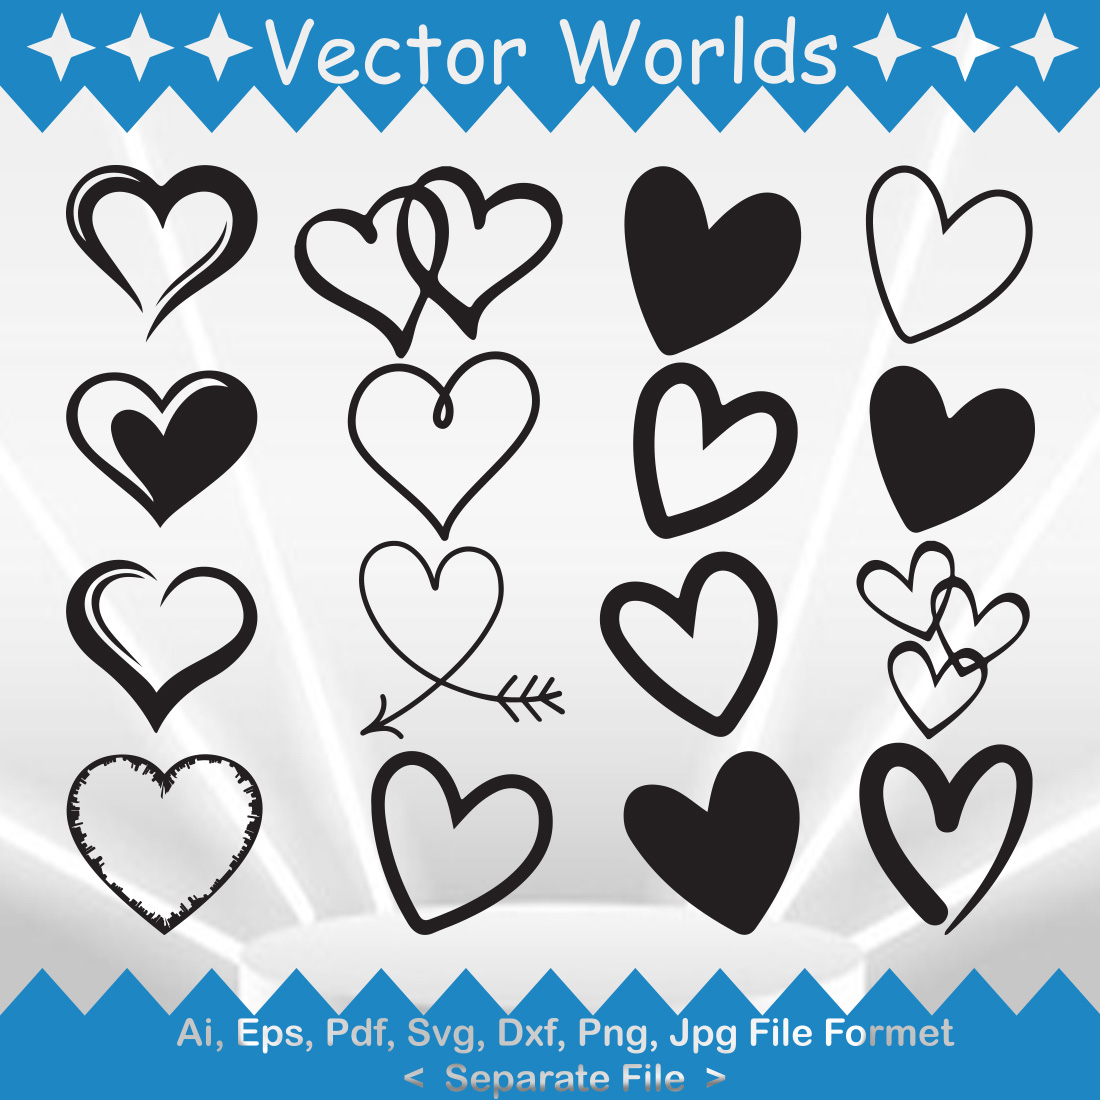 Heart SVG Vector Design cover image.